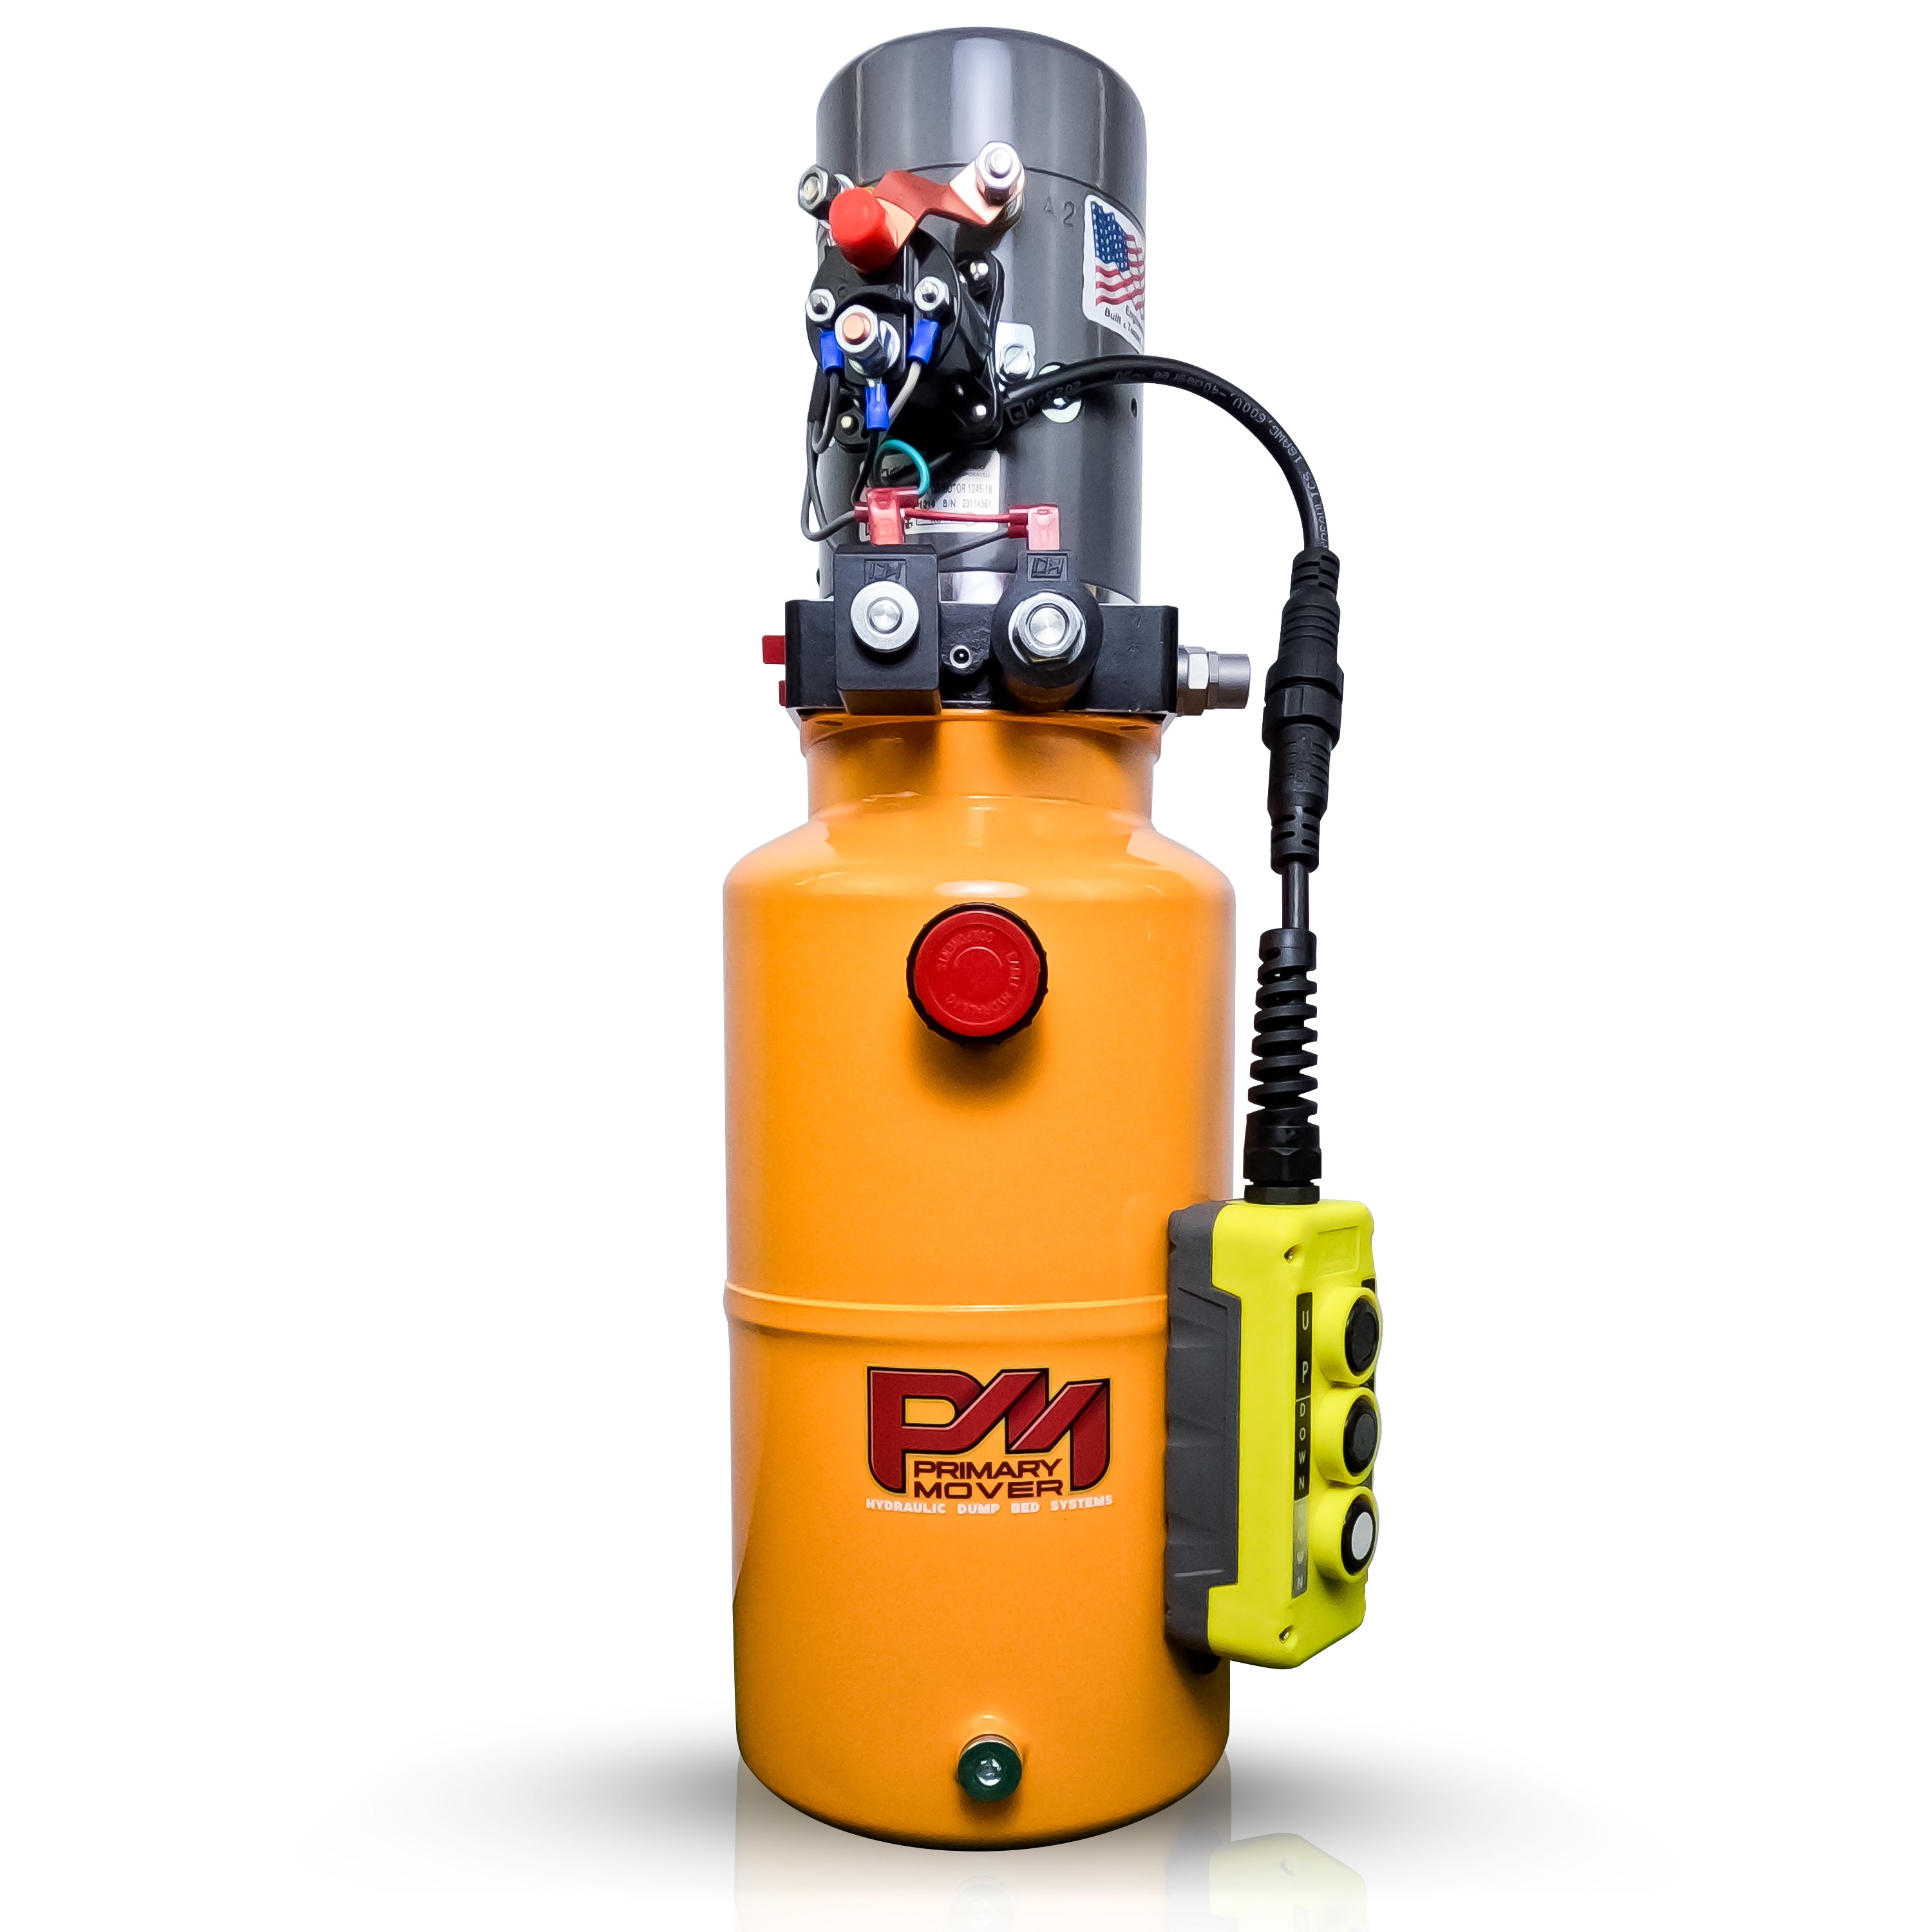 KTI 12V Double-Acting Hydraulic Pump with Steel Reservoir, featuring a yellow and grey cylindrical body and a prominent red button for efficient hydraulic system operation.